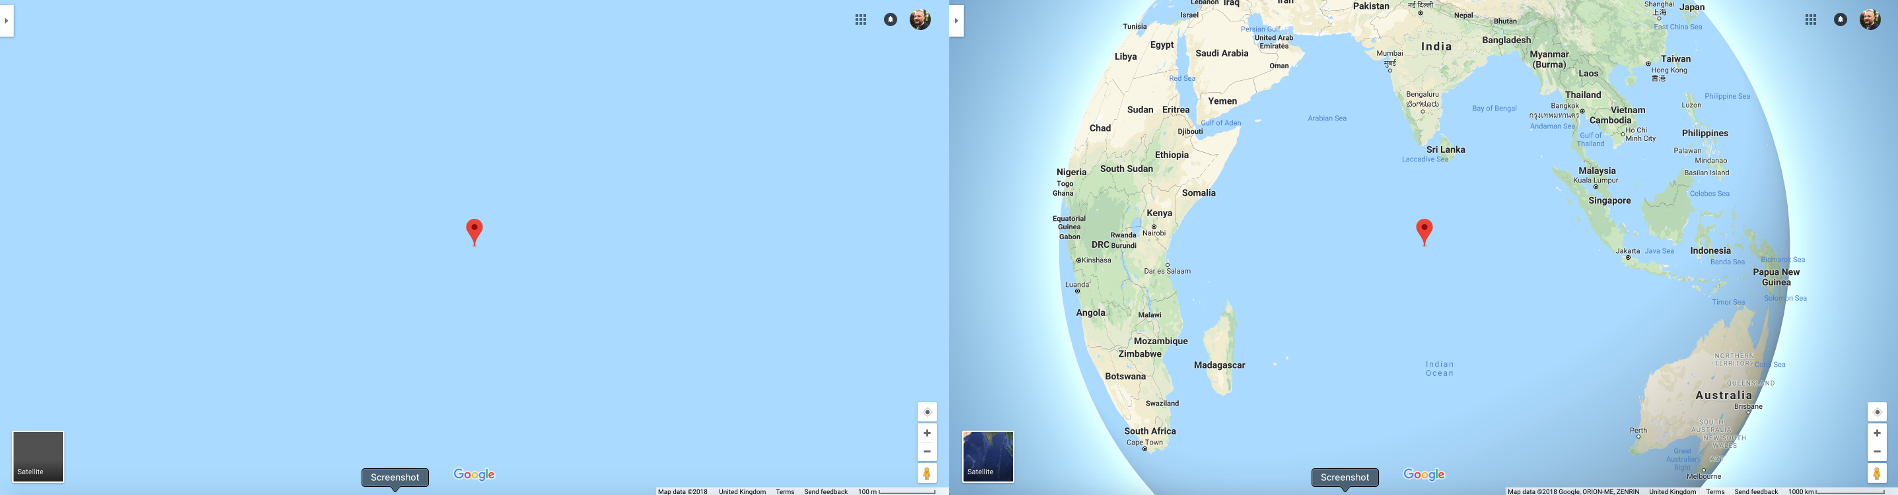 Left: default Google maps zoom level - Right: zoomed out version